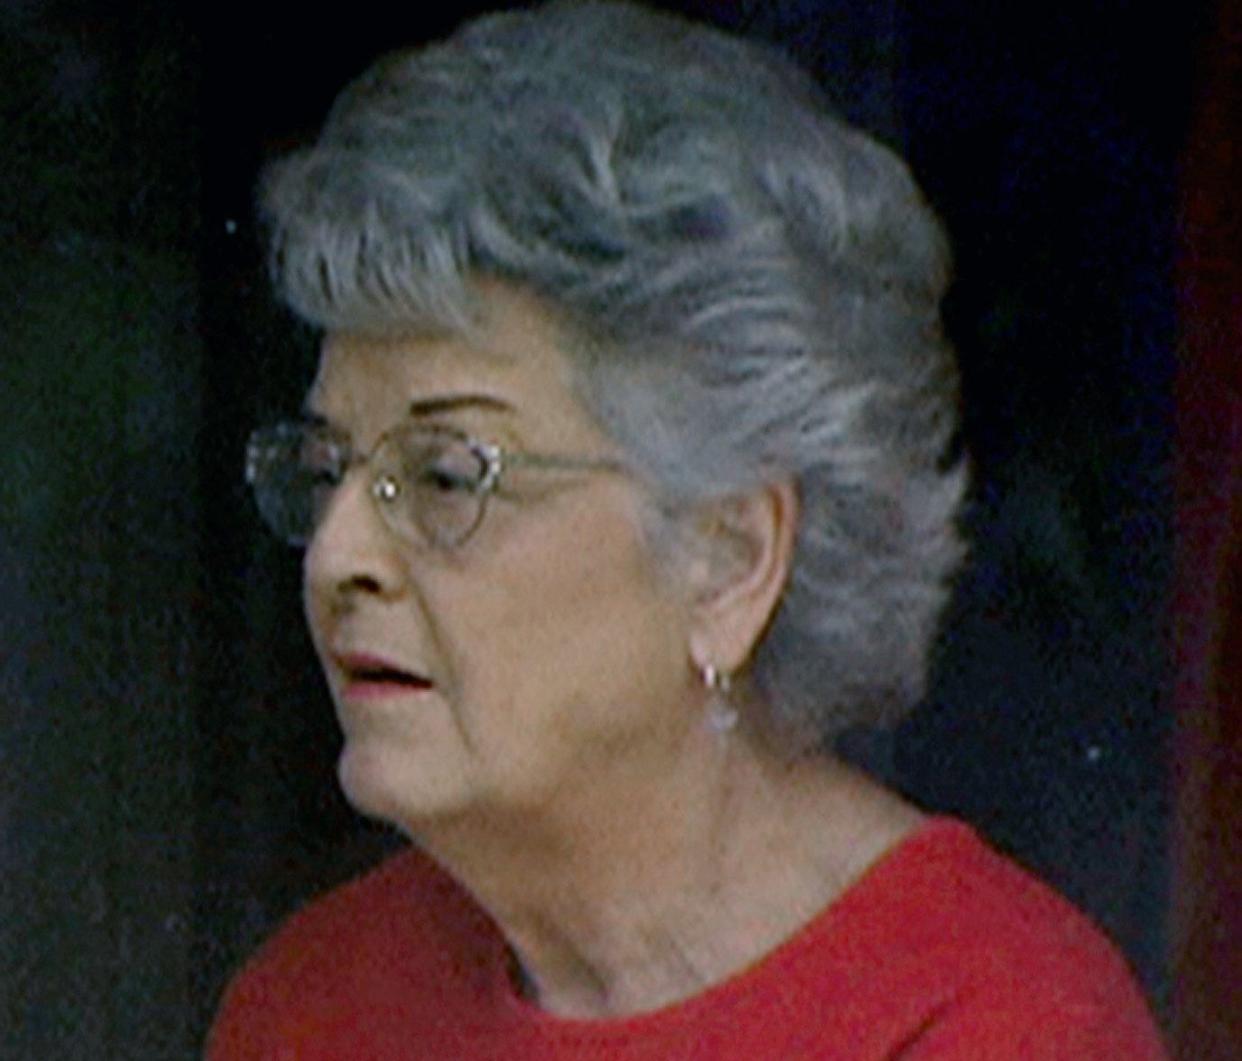 Carolyn Bryant Donham, 84, seen in this image from video taken in 2004 by a "60 Minutes" video crew, is quoted in a 2017 book, “The Blood of Emmett Till,” as saying she lied about Till accosting her in 1955.